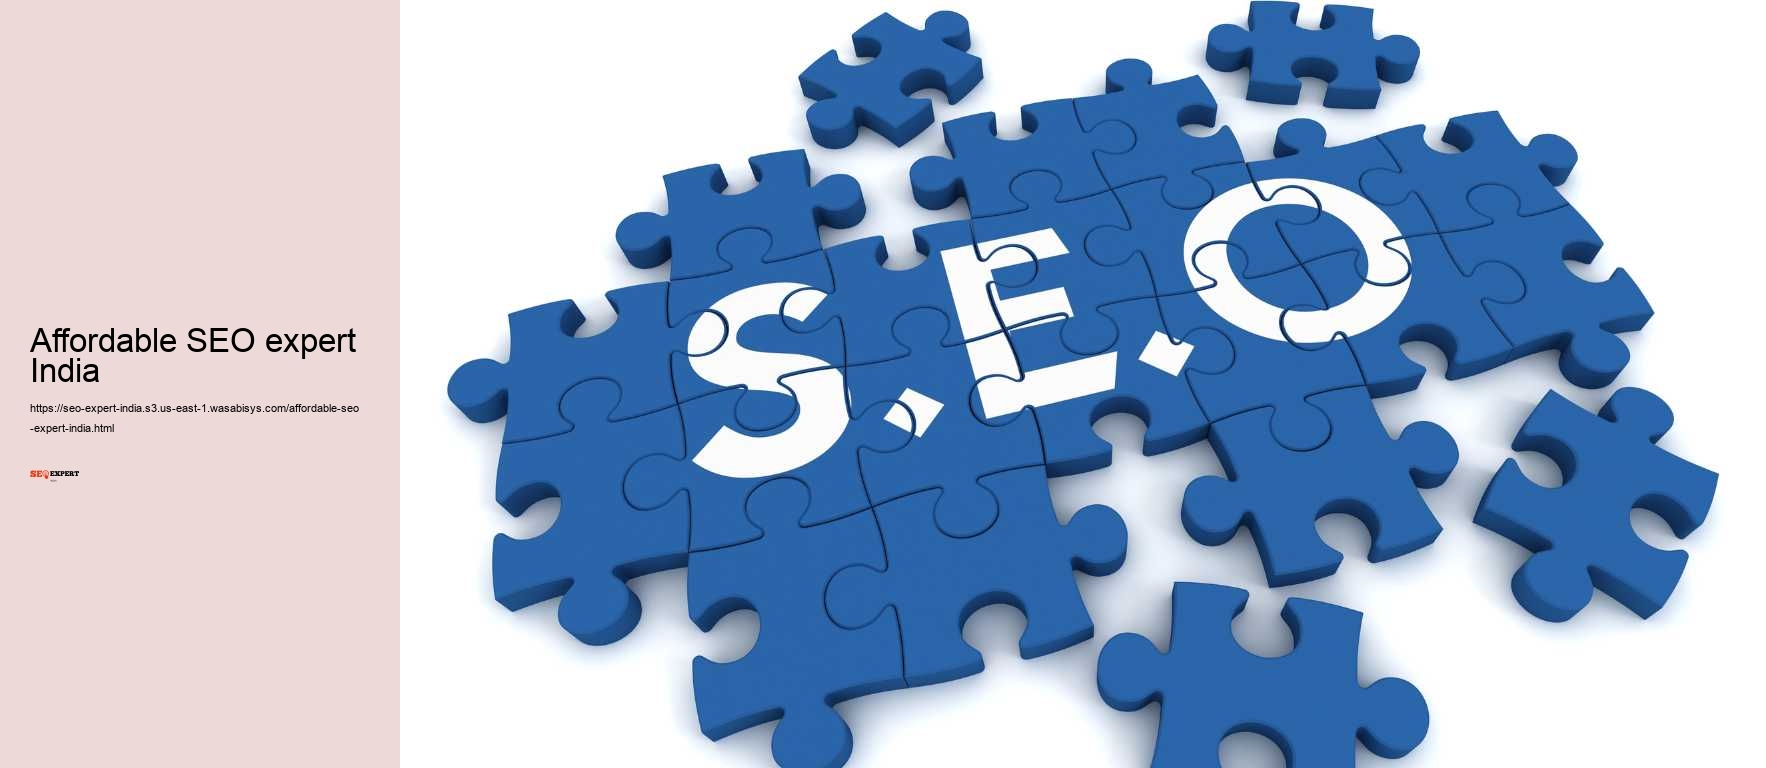 Affordable SEO expert India